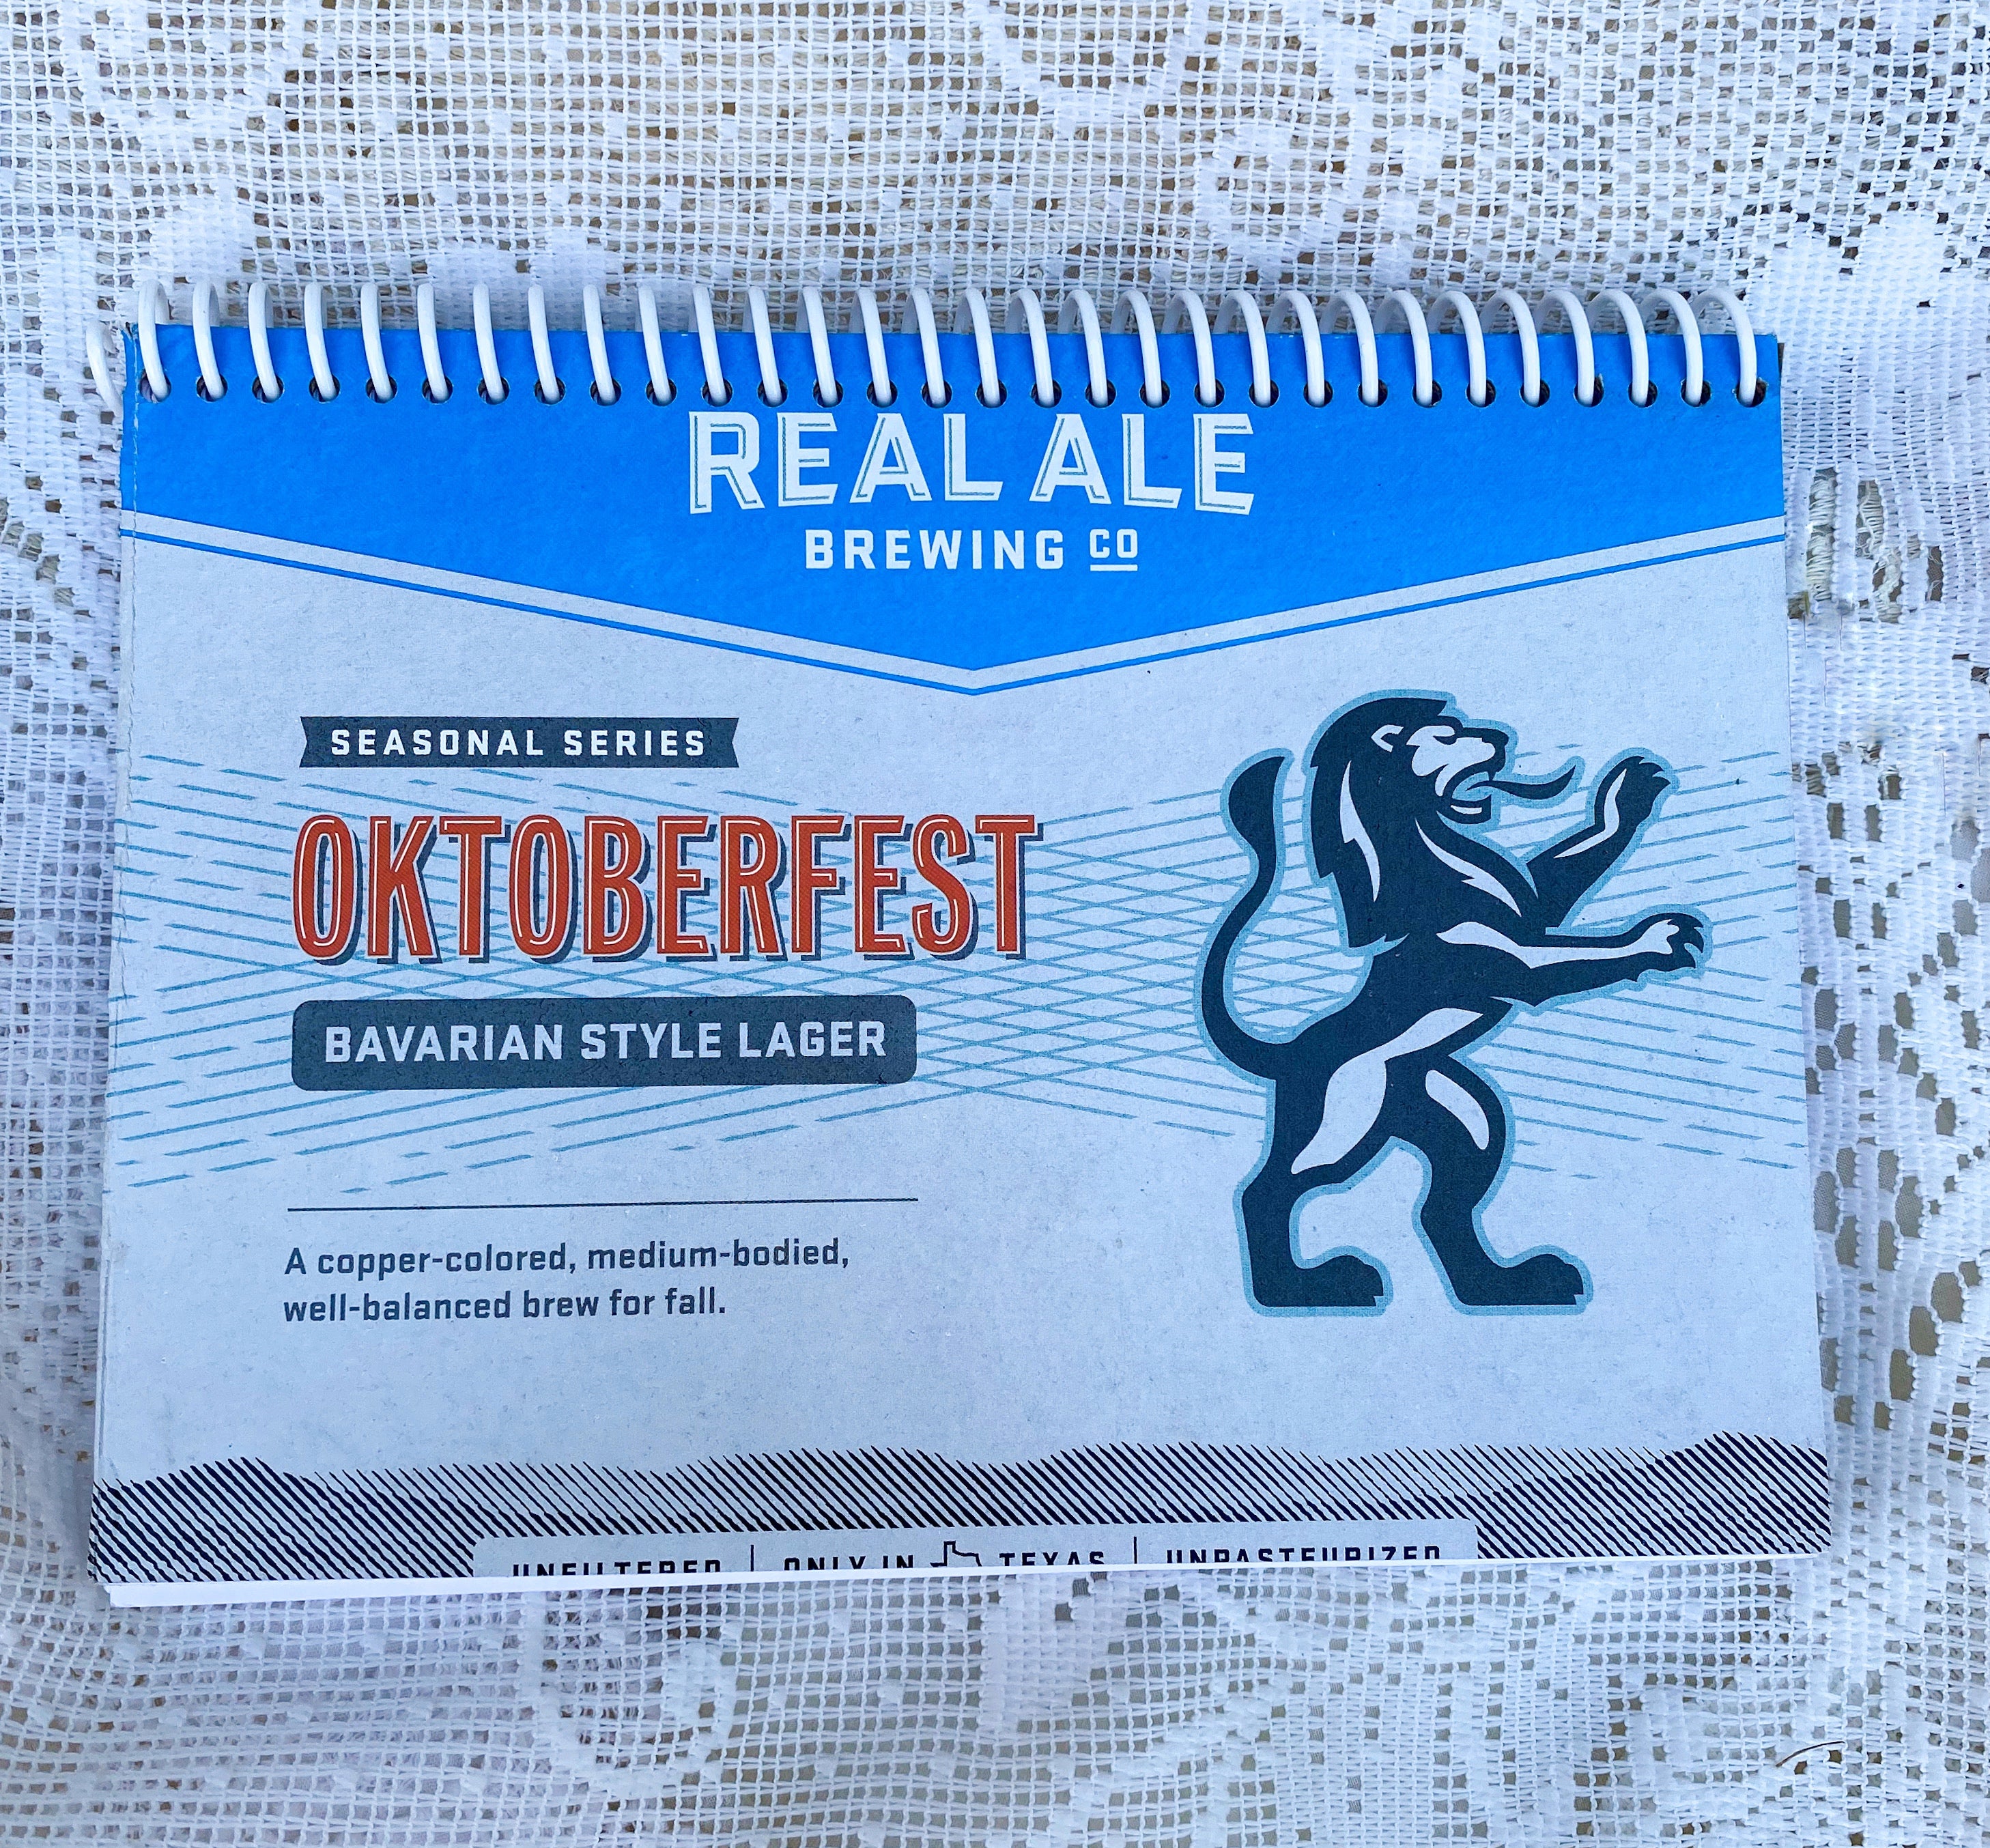 Real Ale Brewing Co. Oktoberfest Recycled Beer Carton Notebook